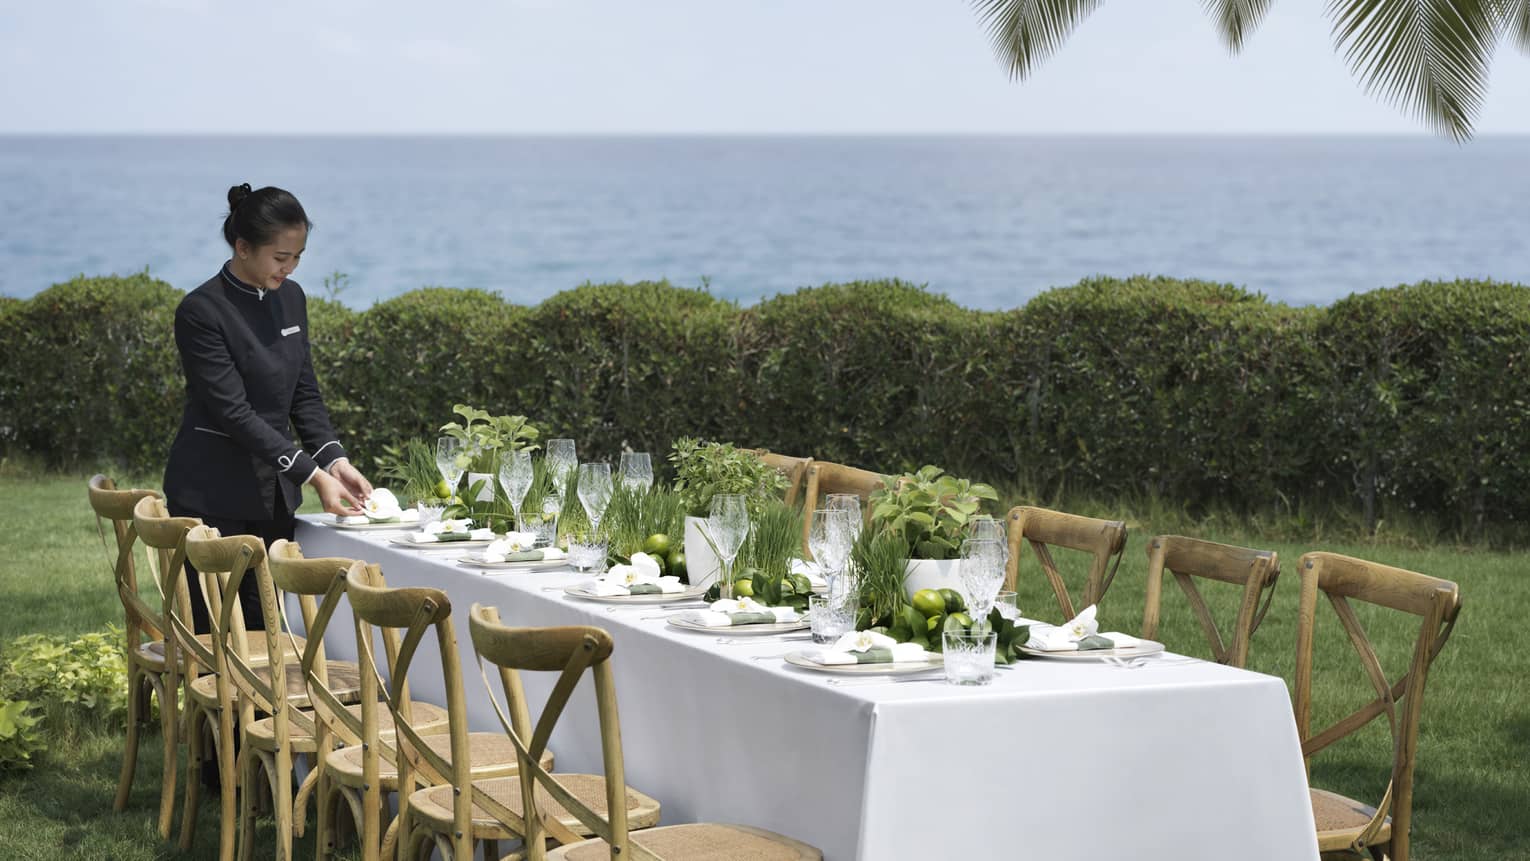 A four Seasons staff setting an outdoor table with wooden chairs overlooking the ocean